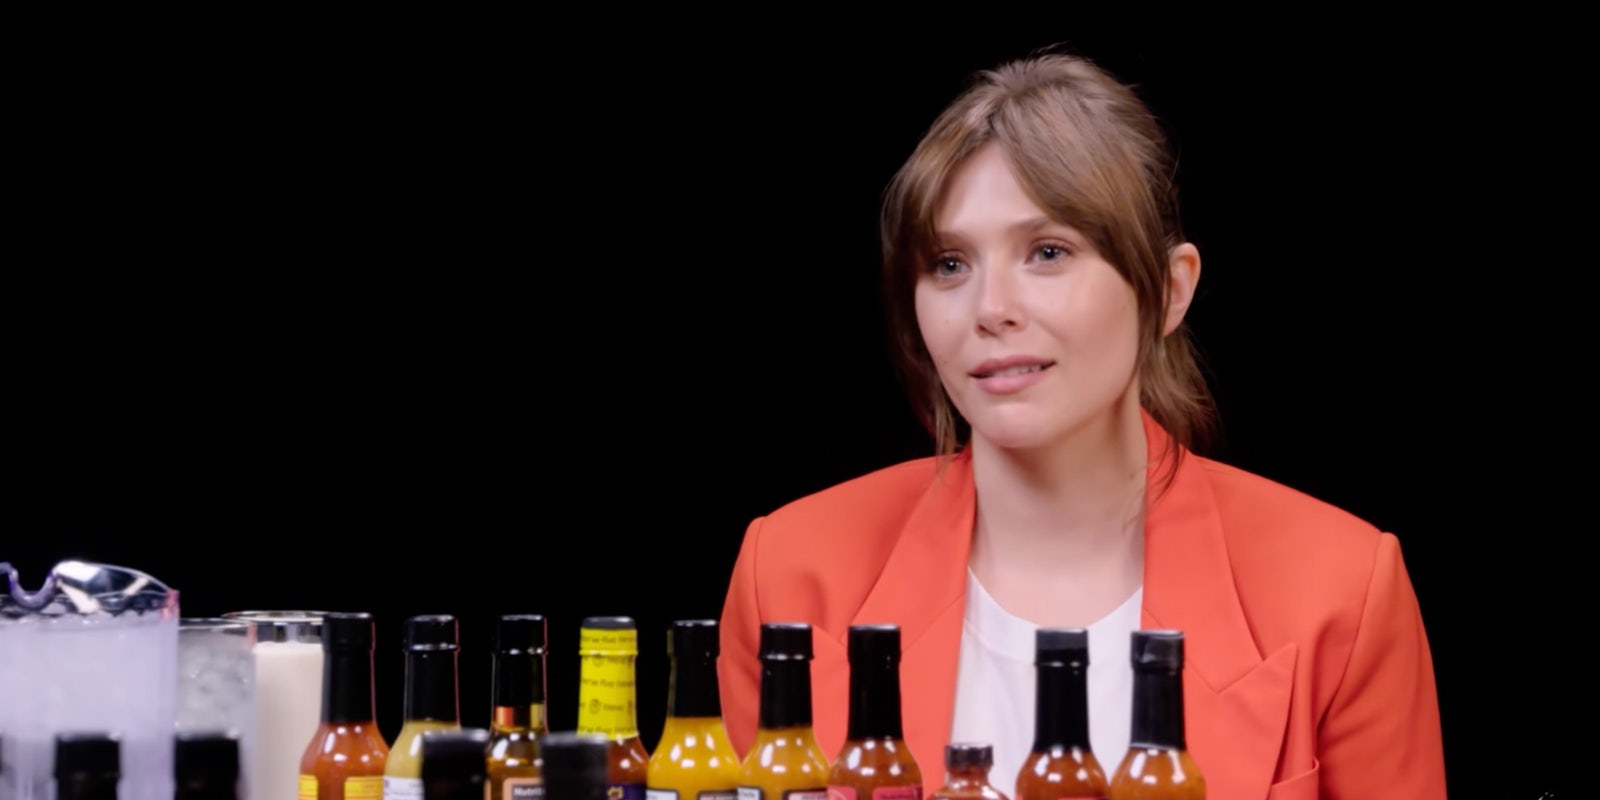 woman sitting in front of hot sauce bottles